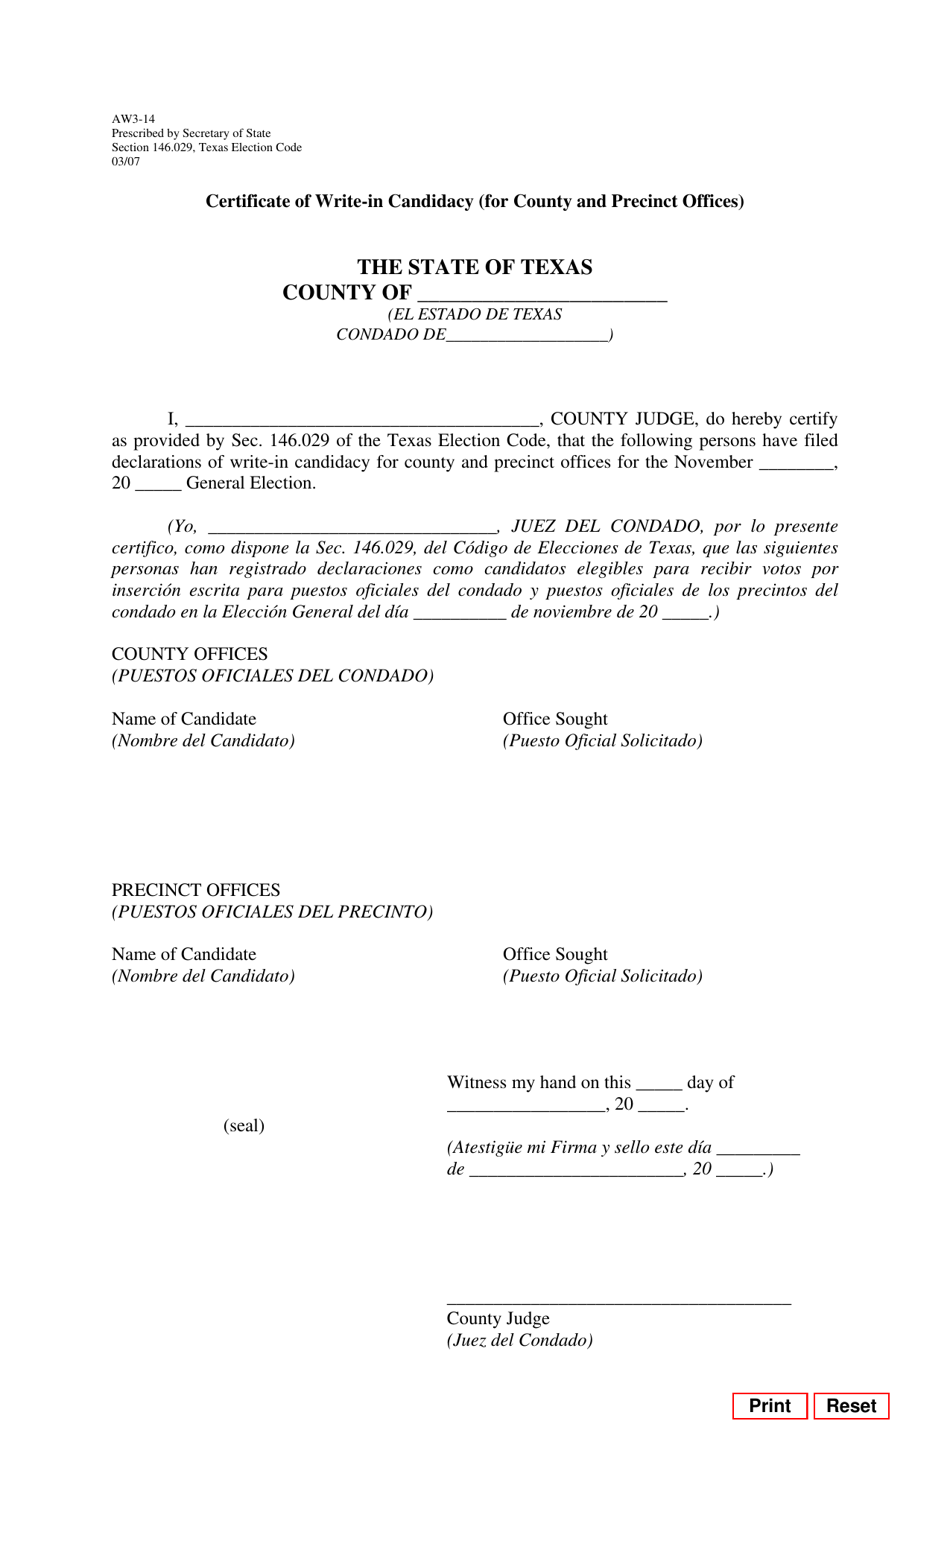 Form AW3-14 Certificate of Write-In Candidacy (For County and Precinct Offices) - Texas (English / Spanish), Page 1